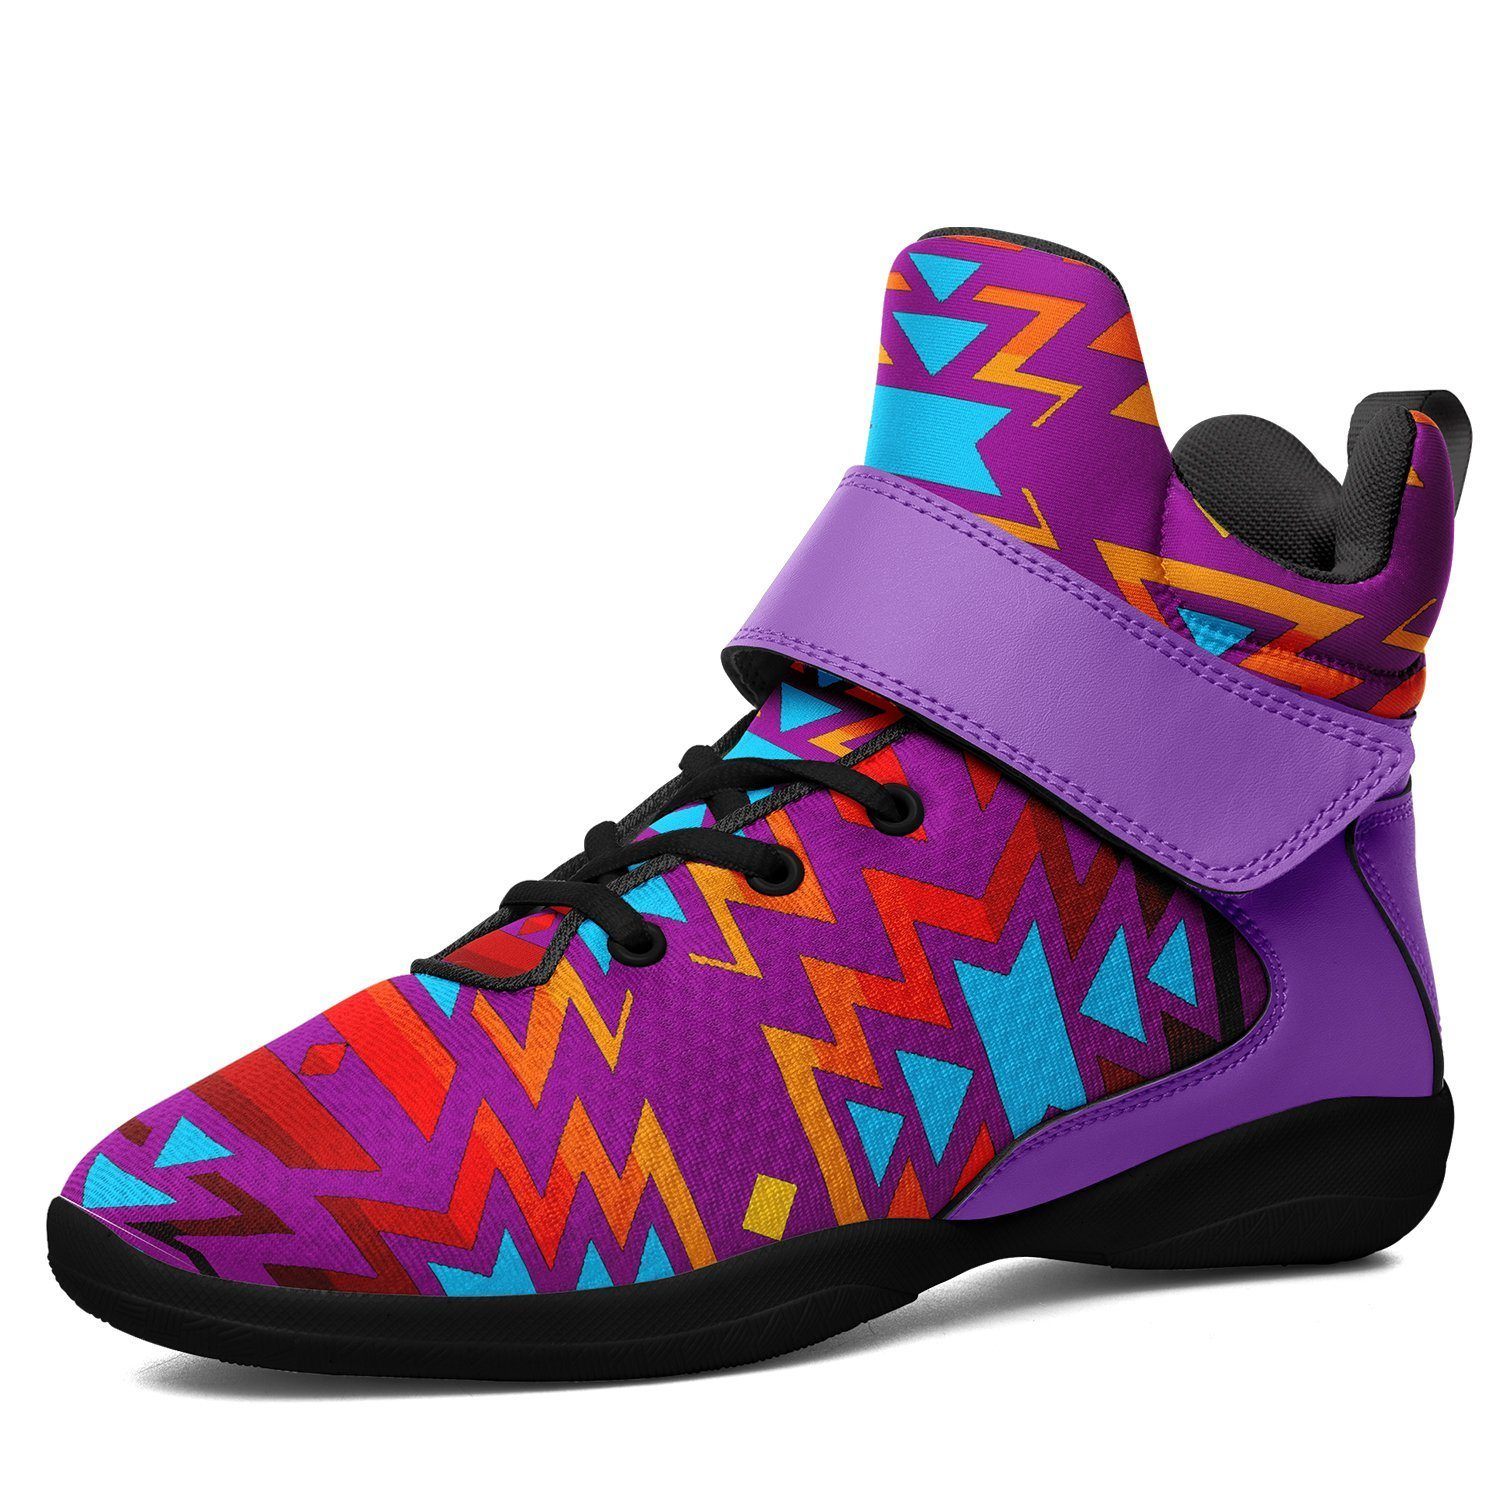 Fire Colors and Turquoise Purple Kid's Ipottaa Basketball / Sport High Top Shoes 49 Dzine US Child 12.5 / EUR 30 Black Sole with Lavender Strap 